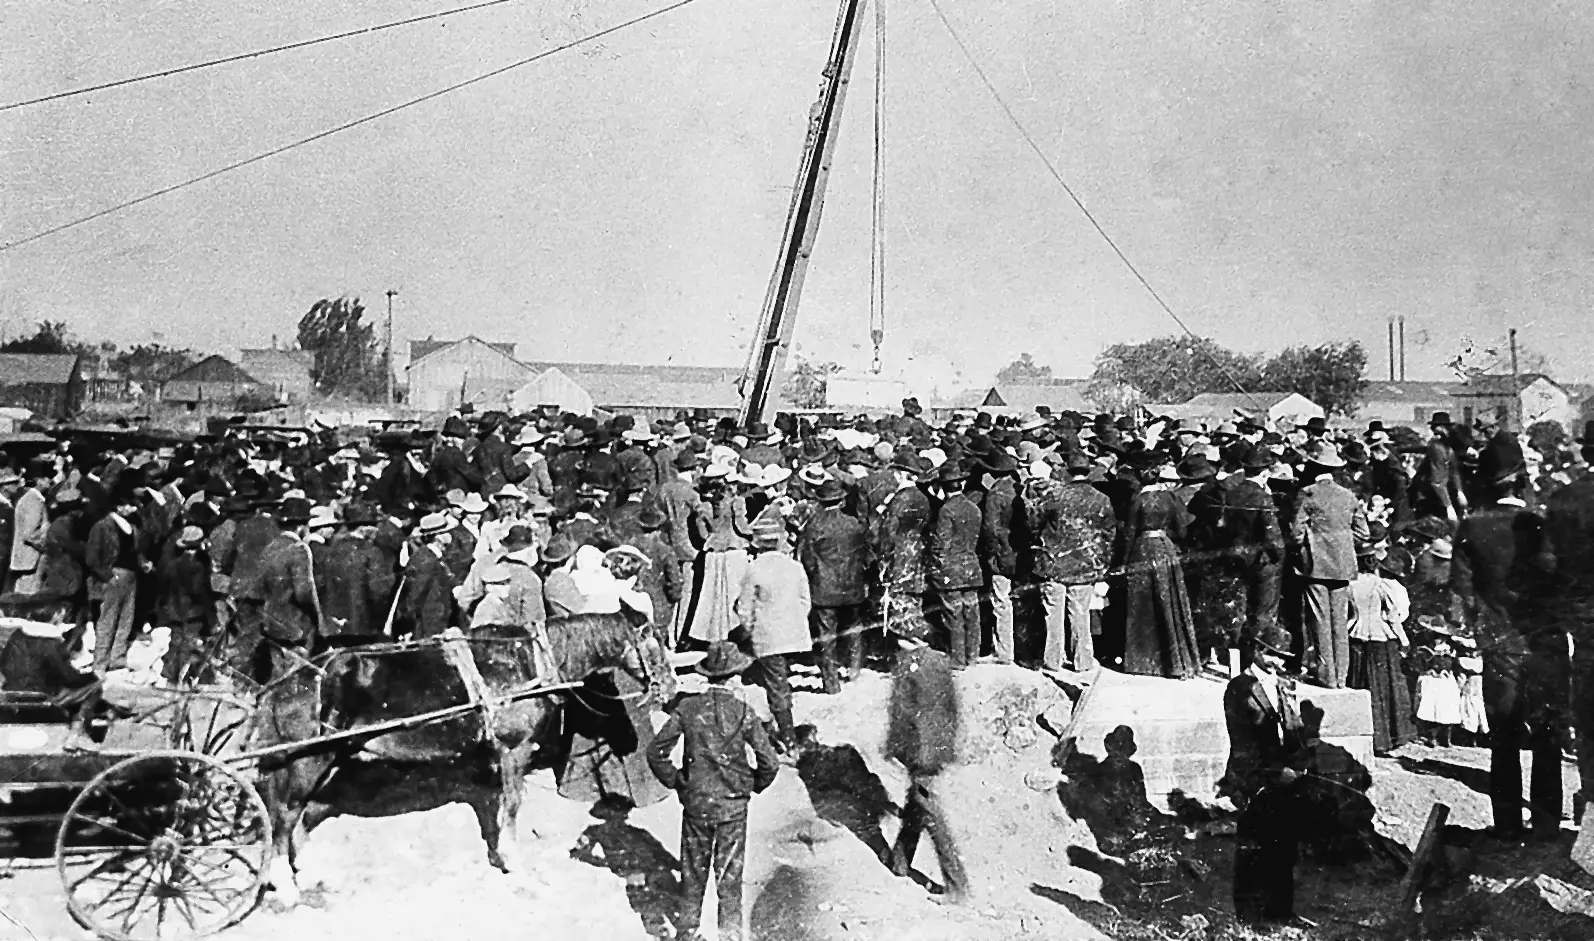 new courthouse cornerstone event 1900